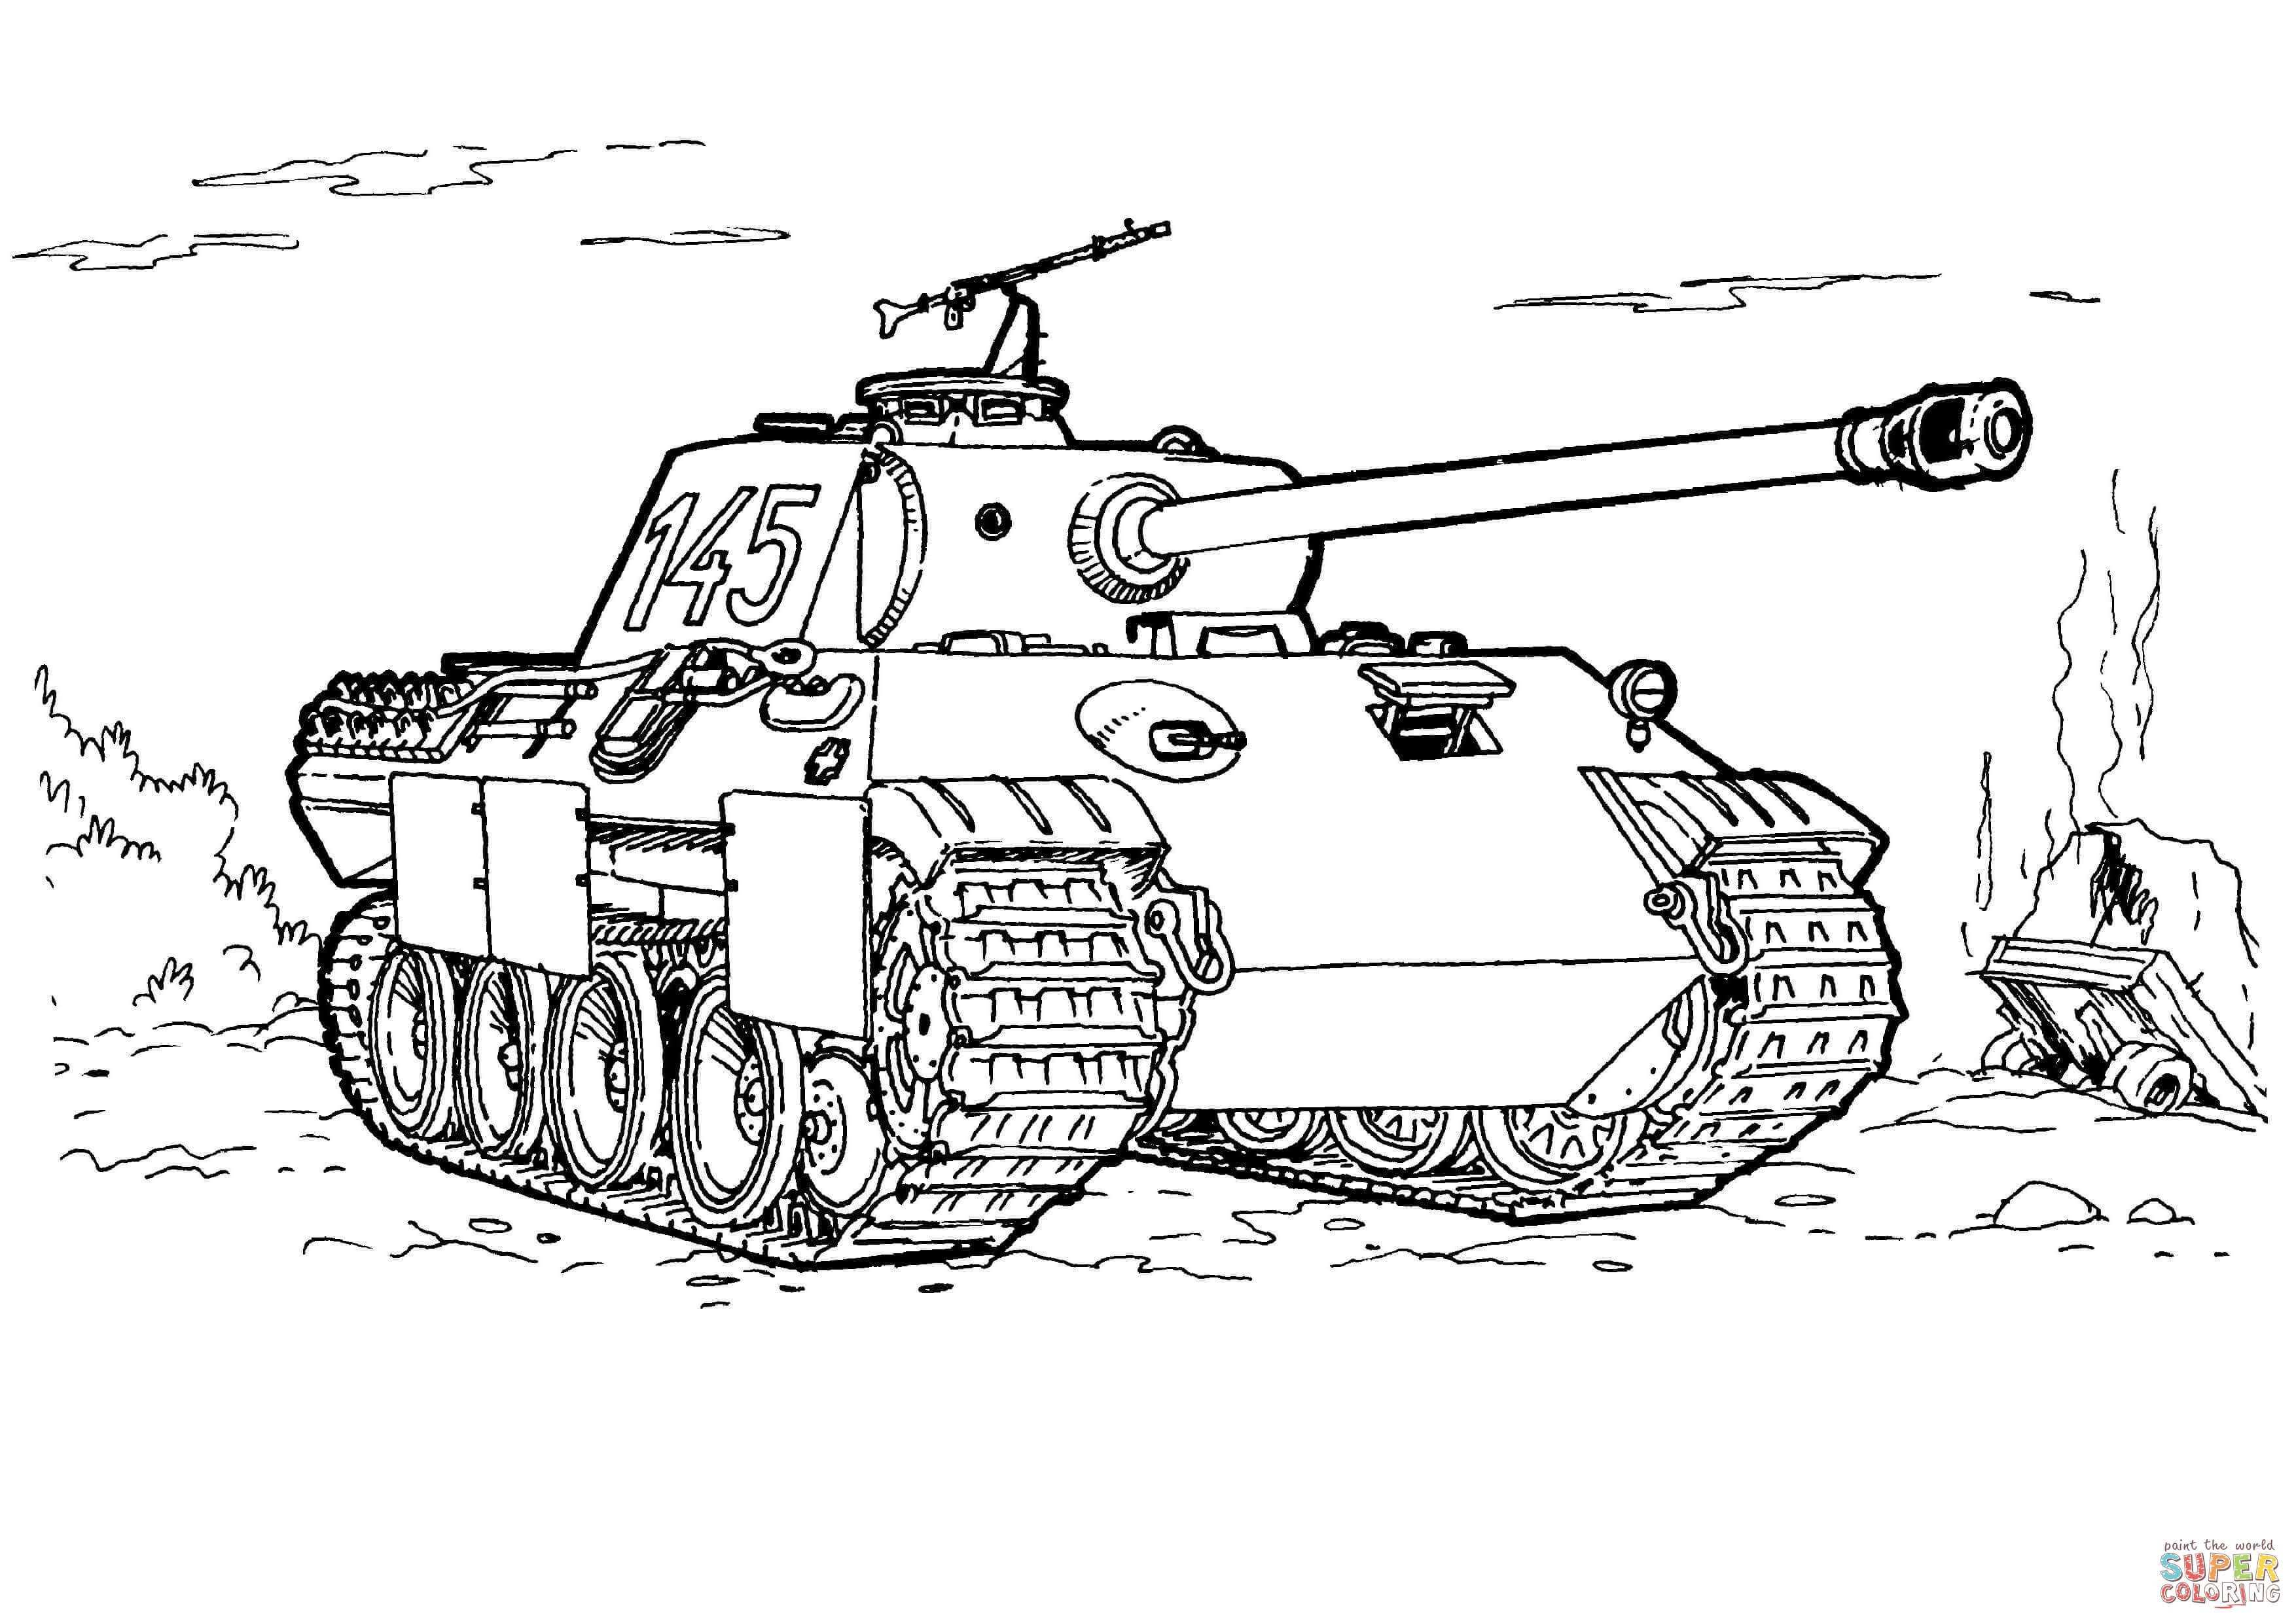 Panther Tank Coloring Page From Tanks Category Select From 27252